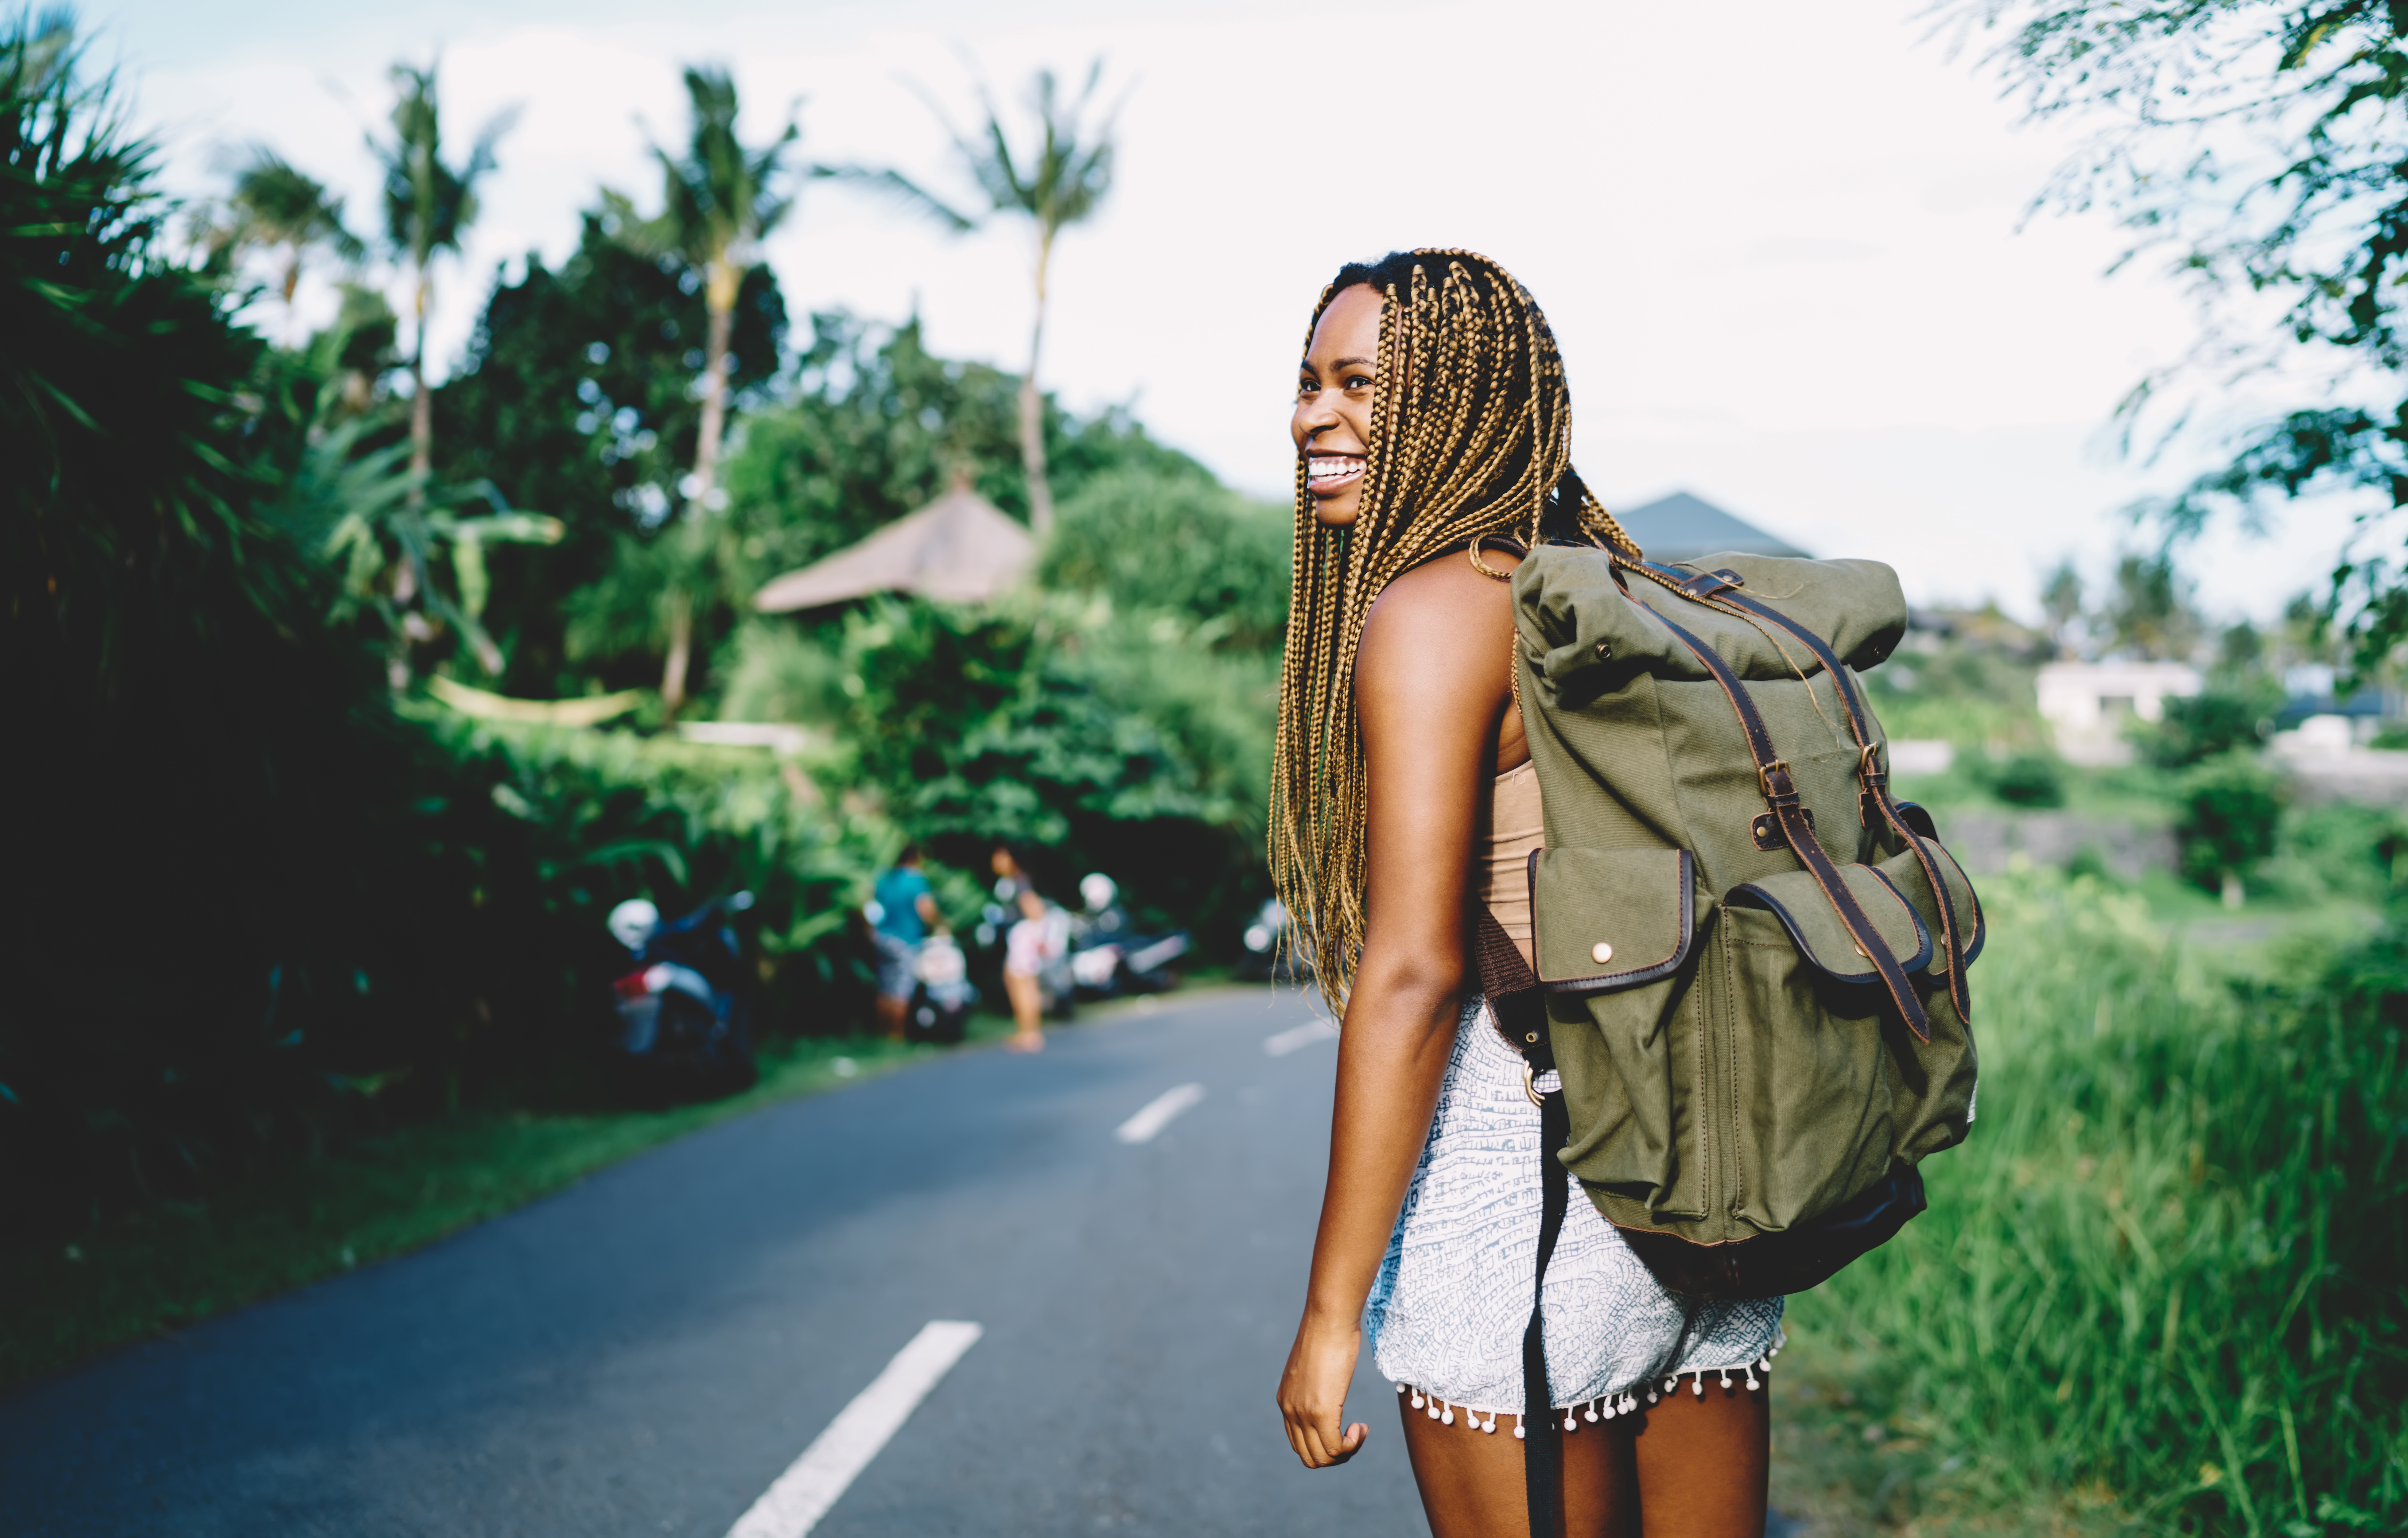 Things to Know Before You Travel Alone